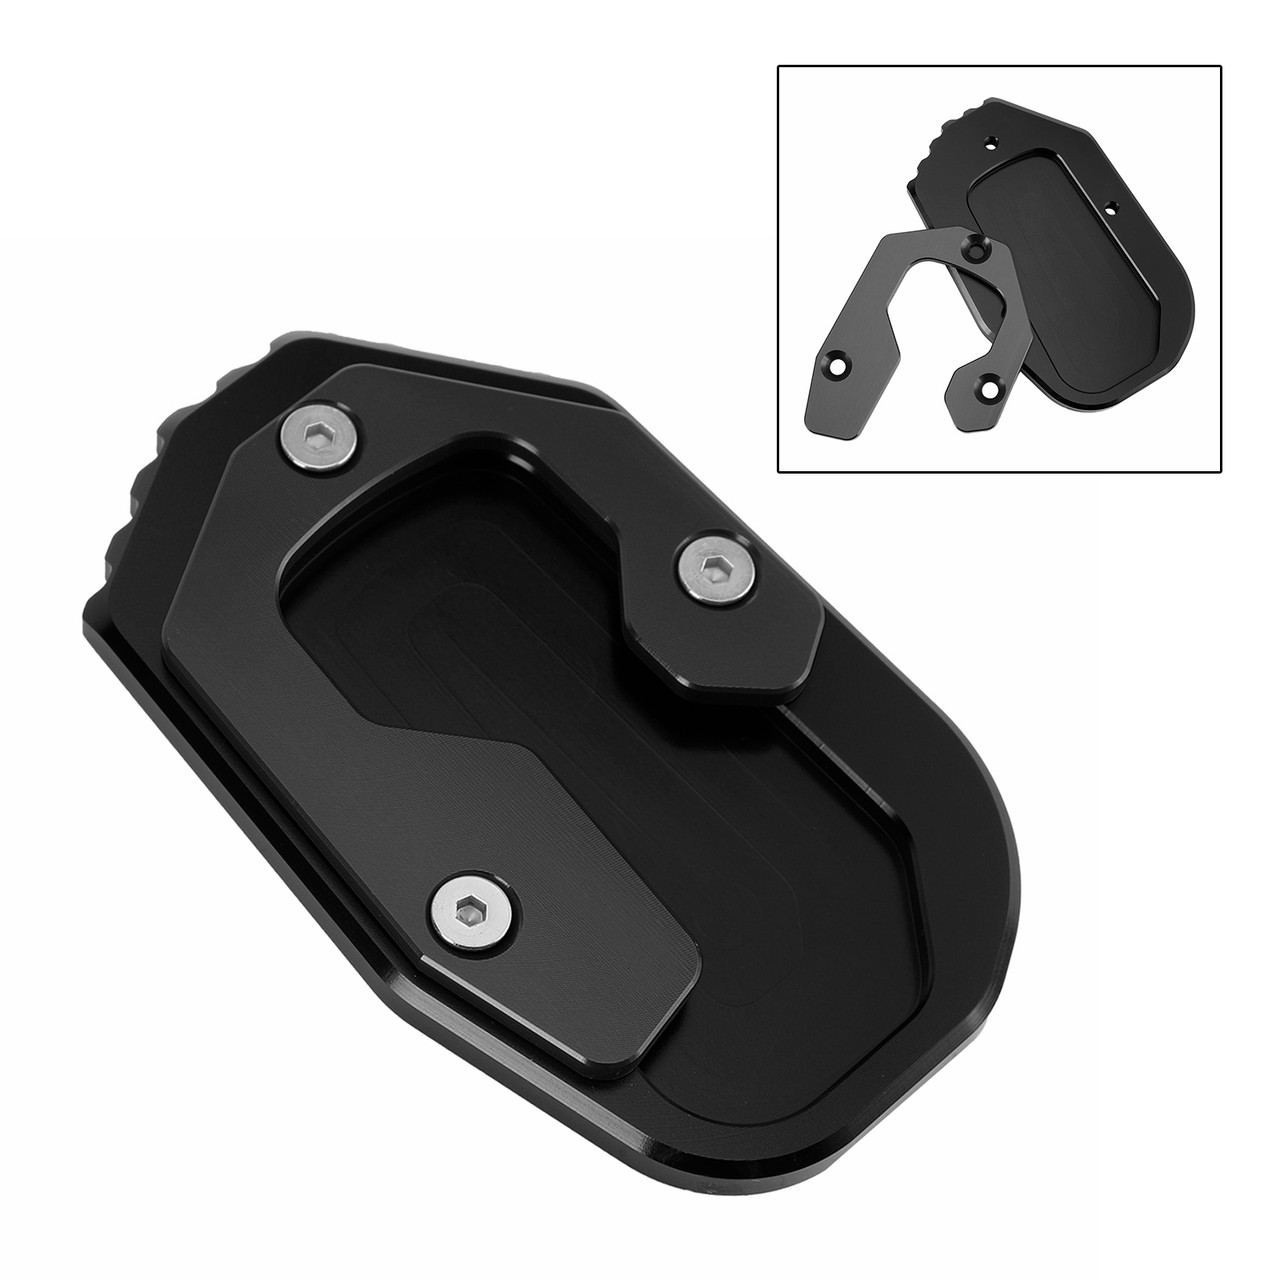 Kickstand Enlarge Plate Pad fit for pan America 1250 2021-2022 BLK